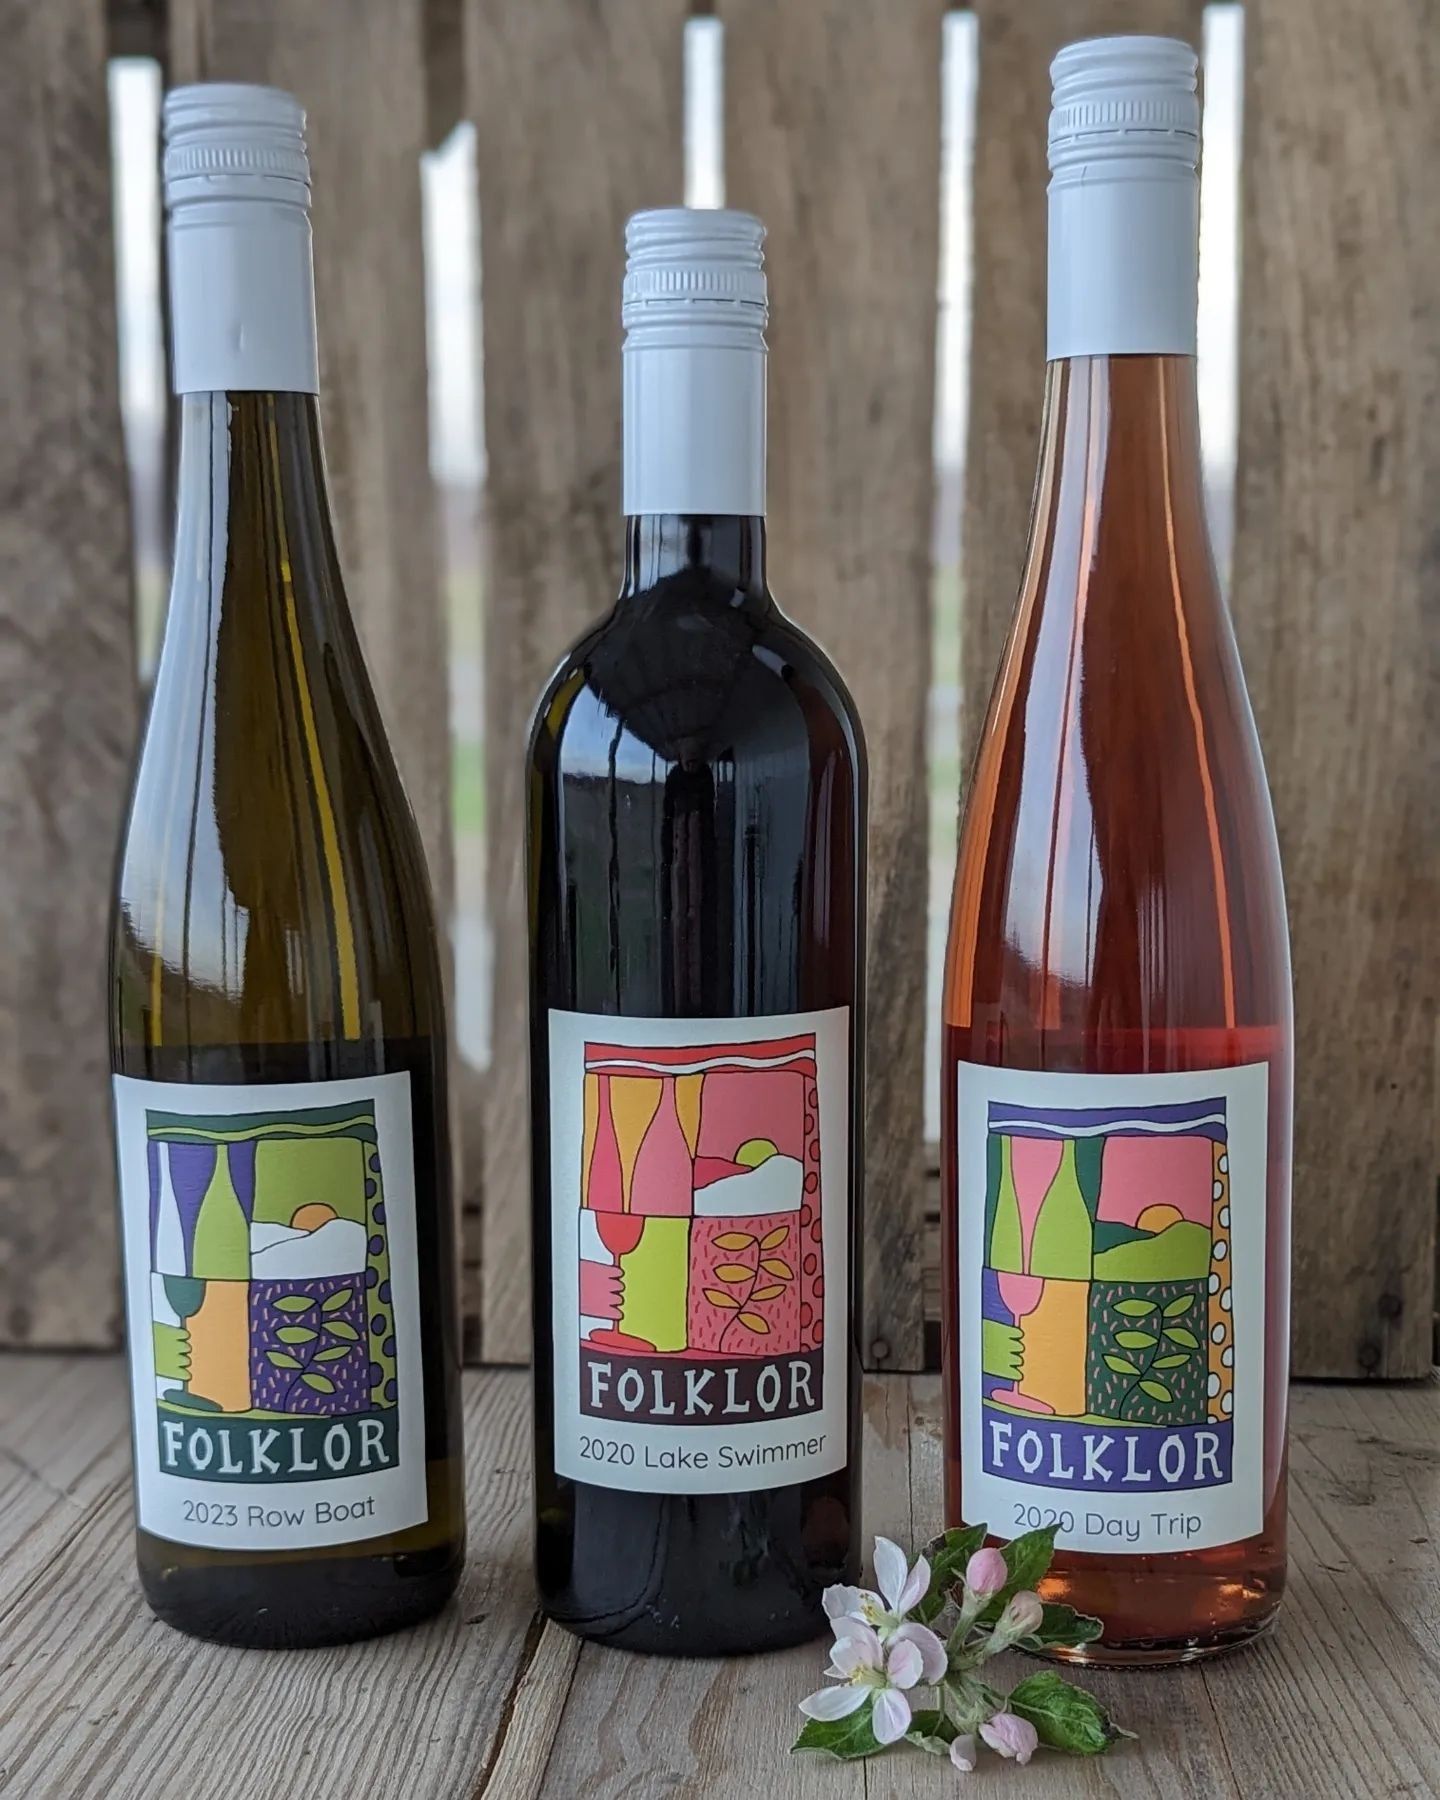 Spring three packs?! Don't mind if we do! Snag your Folklor red, white &amp; rose for porch sipping, mother's day gifting and weekend grilling.

Packed with three of our mild-weather faves

💐 2023 Row Boat 
Bright acidity and pronounced aromatics ma